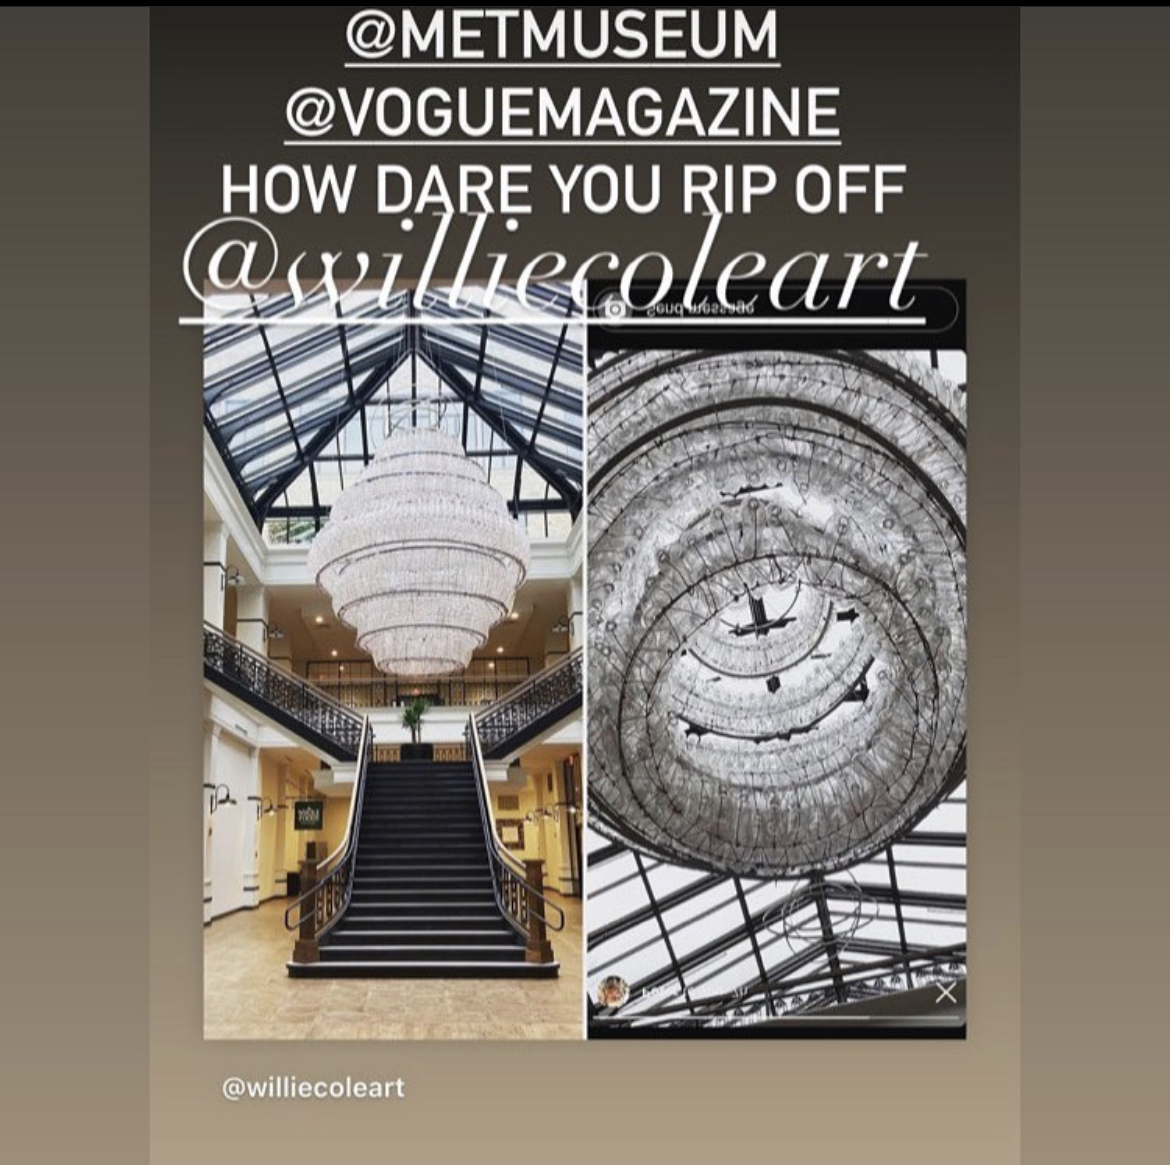 Two images of chandeliers that appear to be made of clear plastic bottles. Above there is text reading '@metmuseum @voguemagazine HOW DARE YOU RIP OFF @williecoleart'.